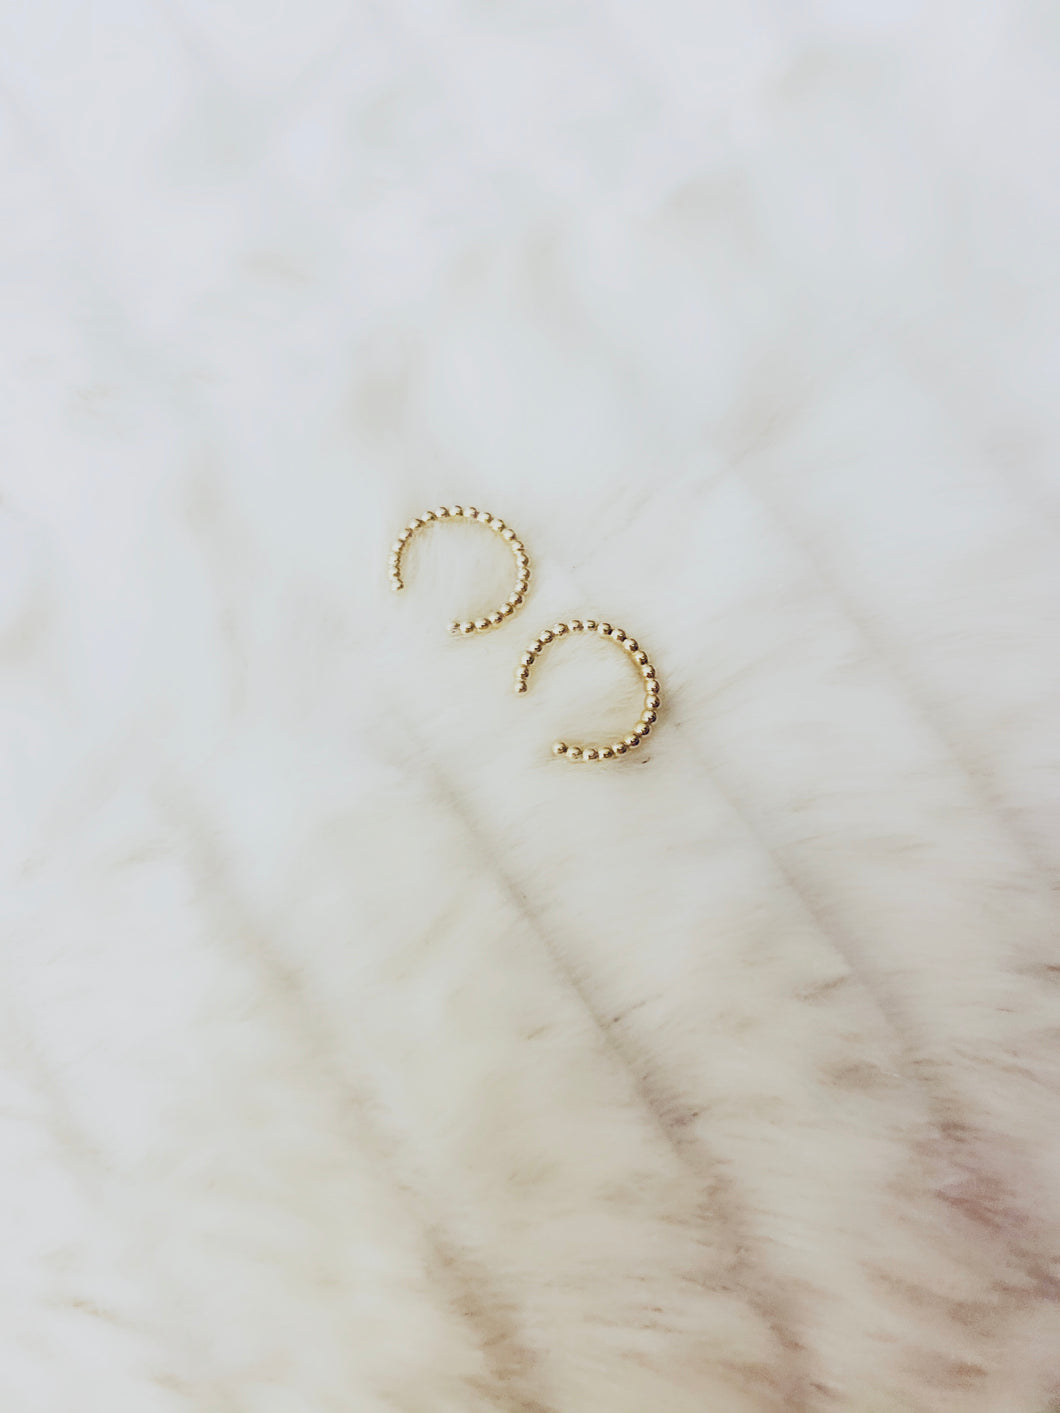 Ear Cuff in Sterling Silver Gold Plated